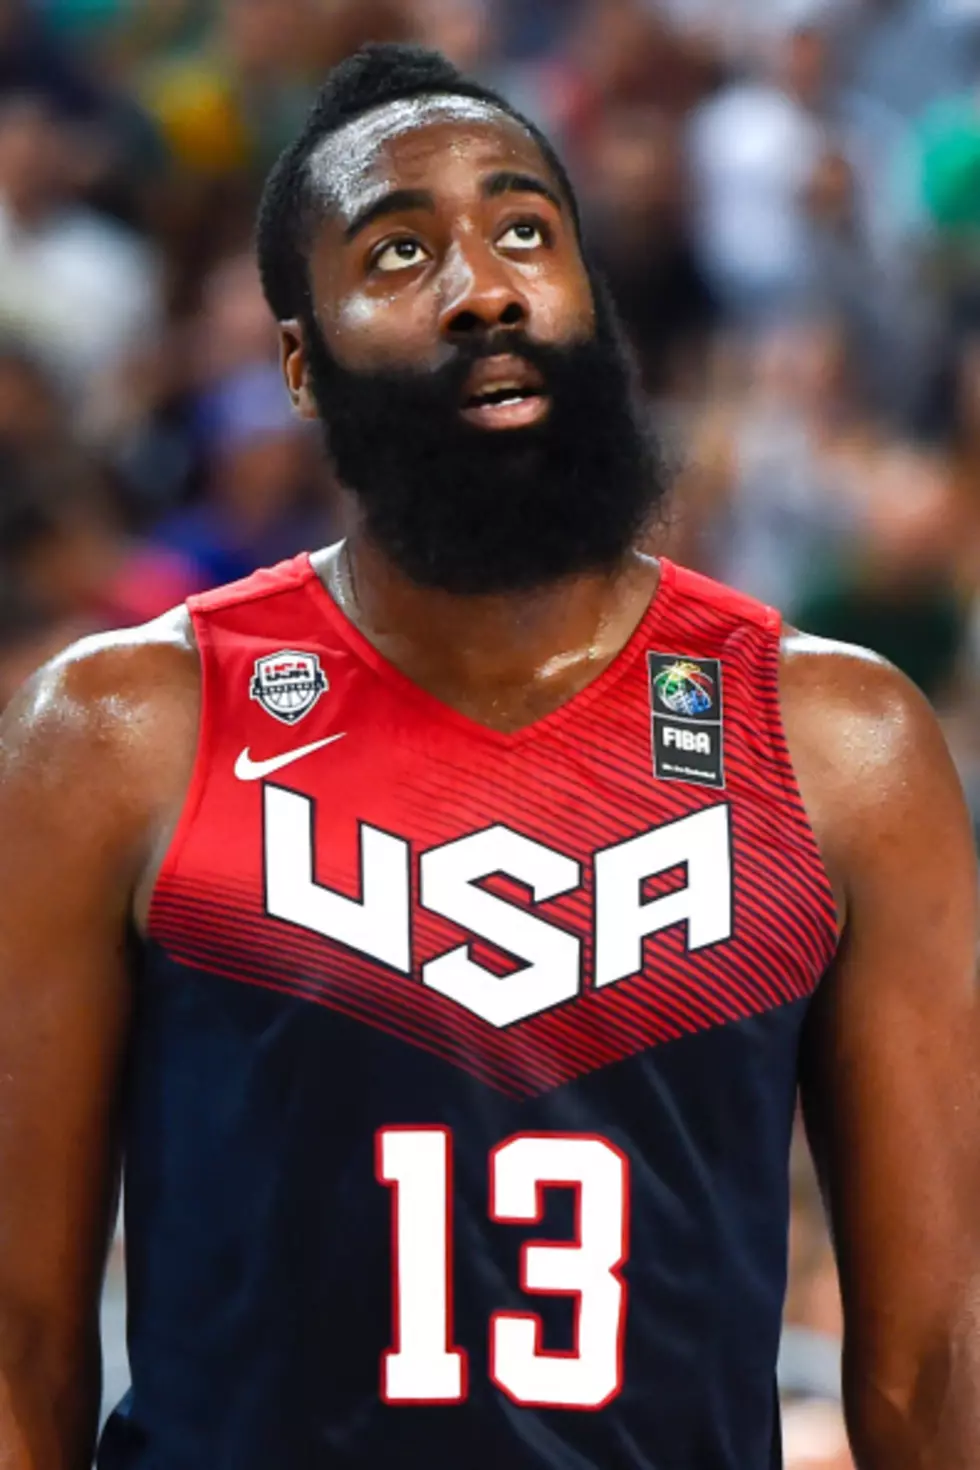 James Harden Crashing His Motorized ‘Segway’ While in Barcelona For the FIBA World Cup – VIDEO